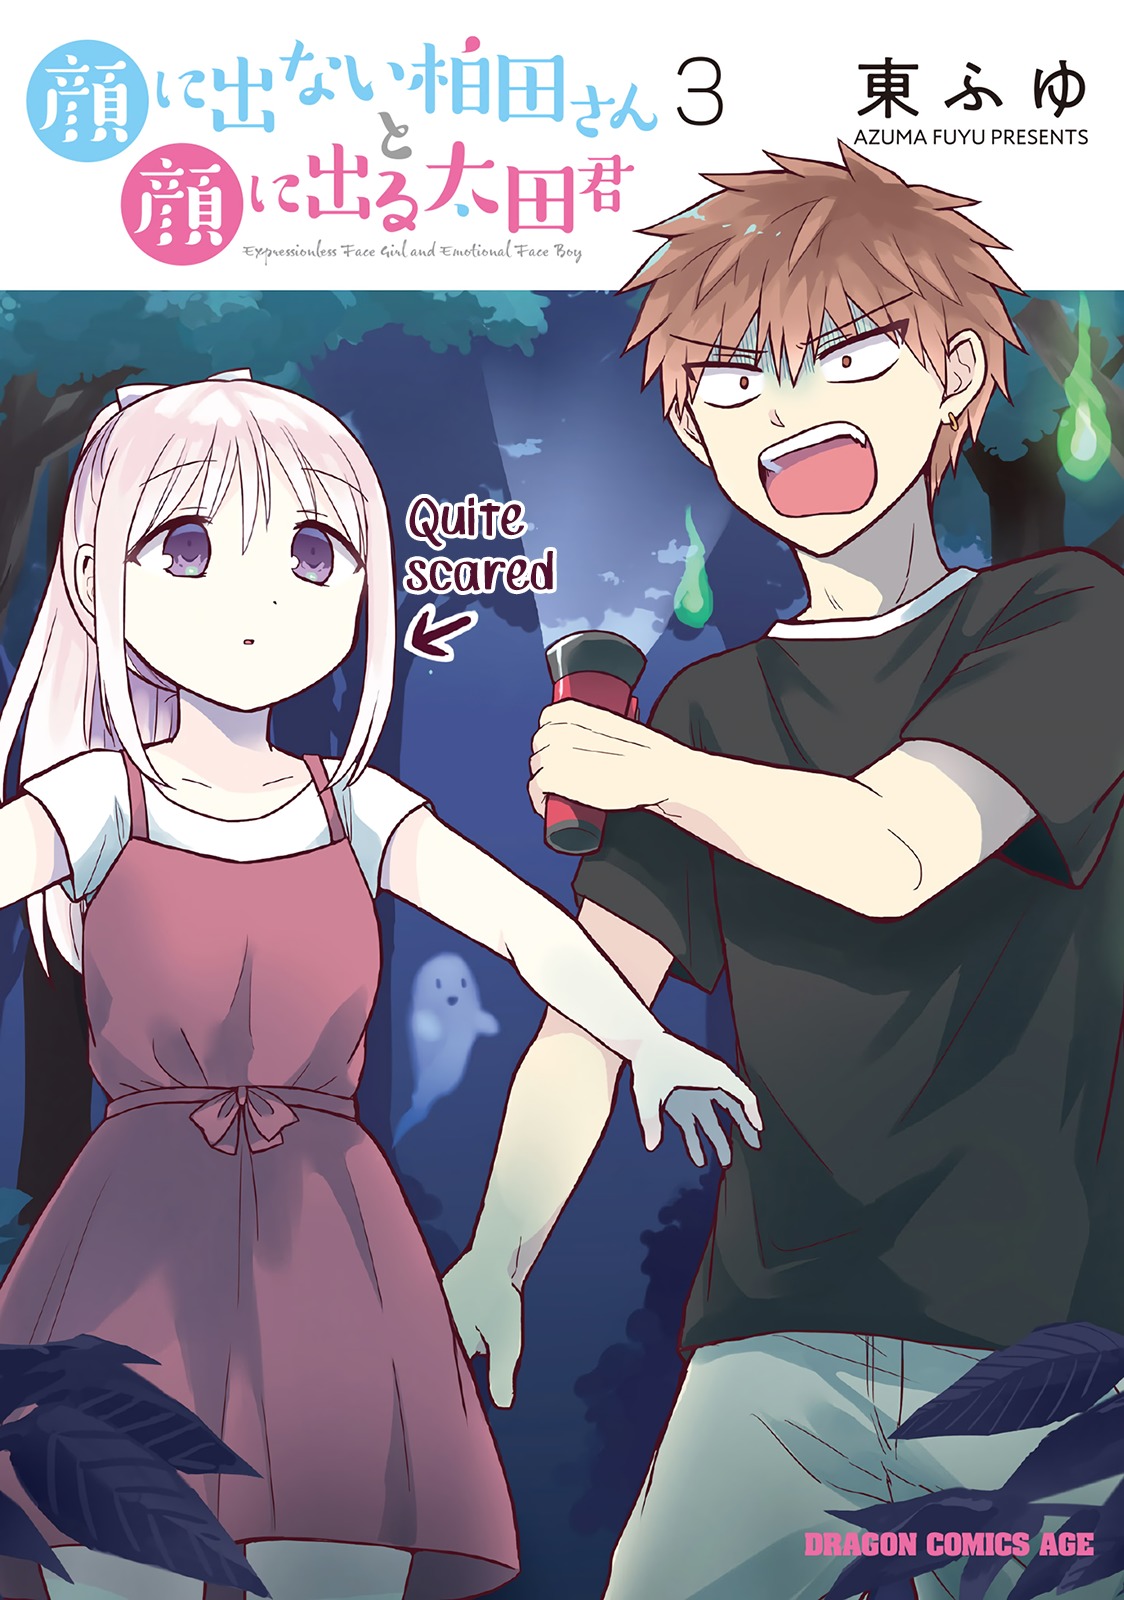 Expressionless Face Girl and Emotional Face Boy vol.3 ch.26